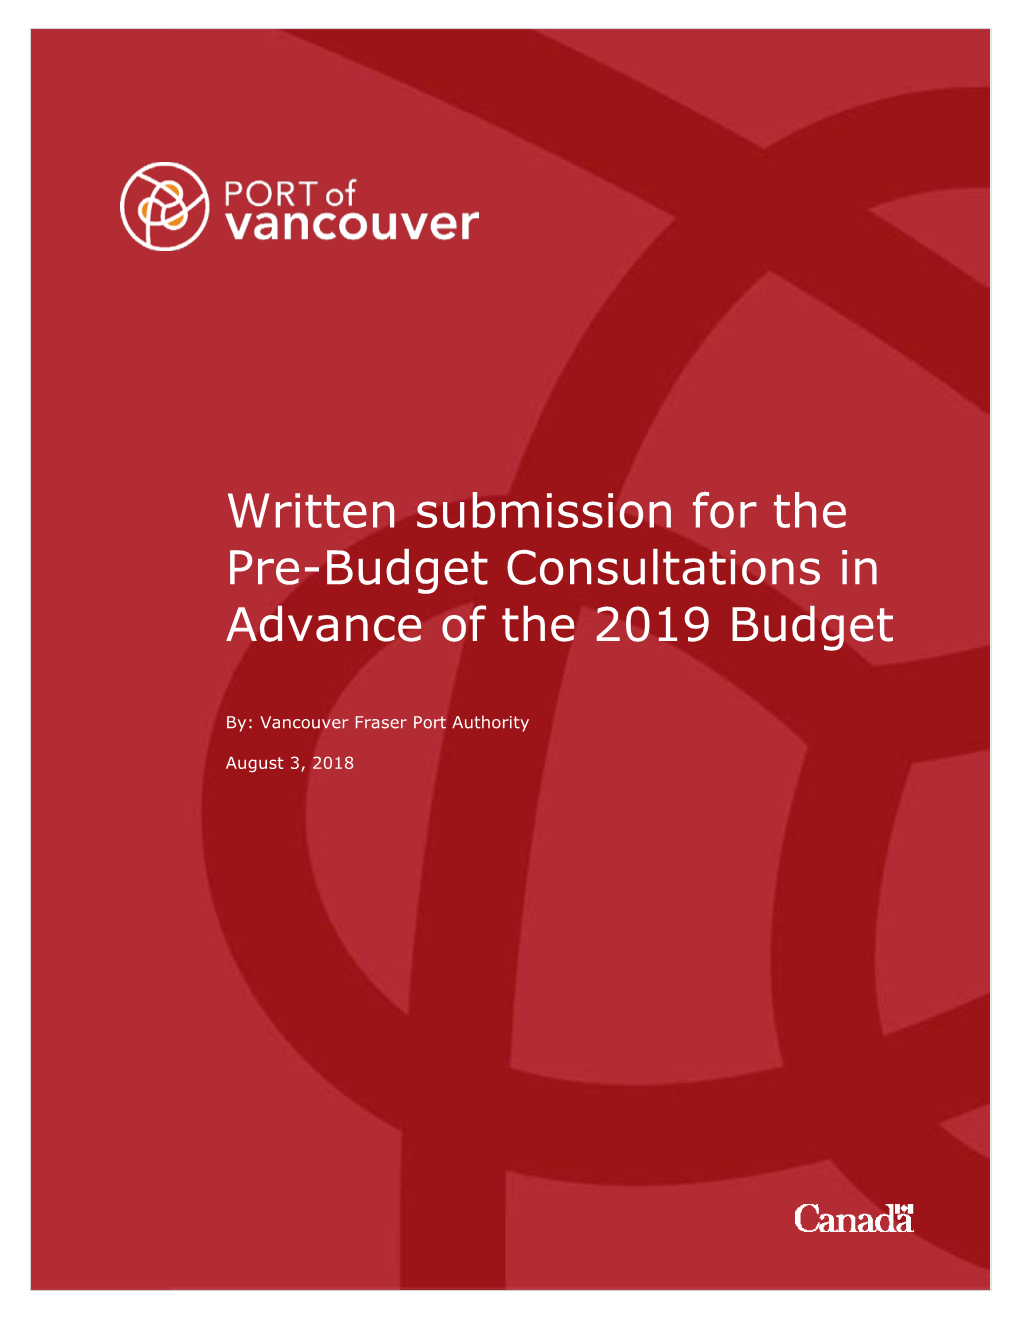 Written Submission for the Pre-Budget Consultations in Advance of the 2019 Budget